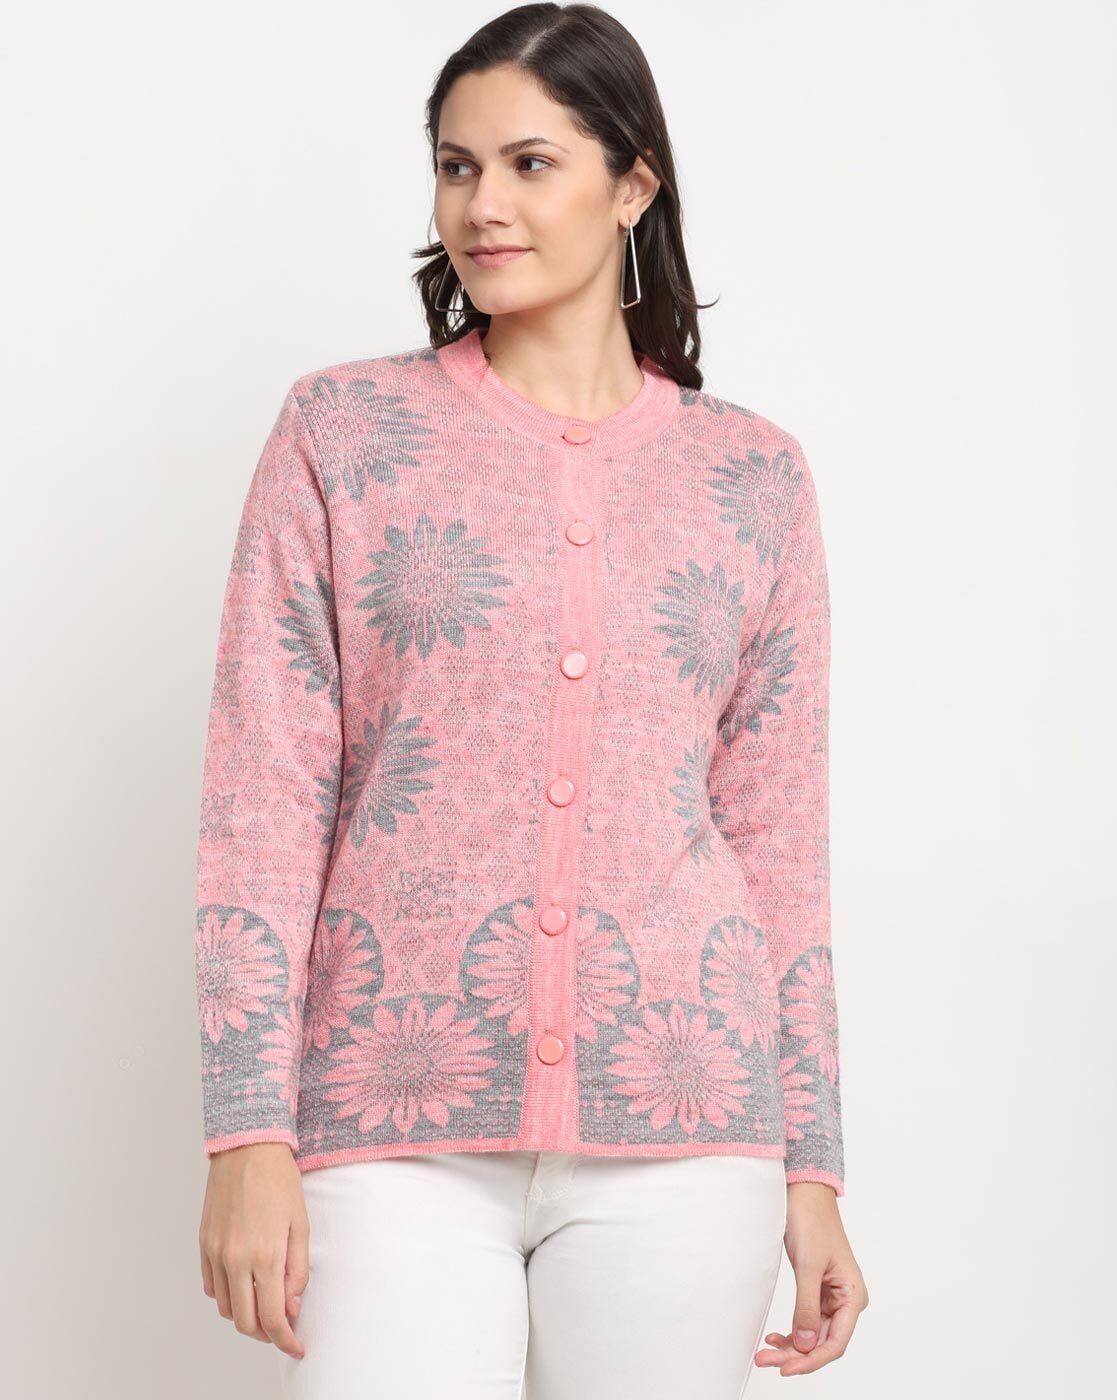 Embroidered Ladies Cardigan at Rs 300/piece, Cardigan Coats in Ludhiana